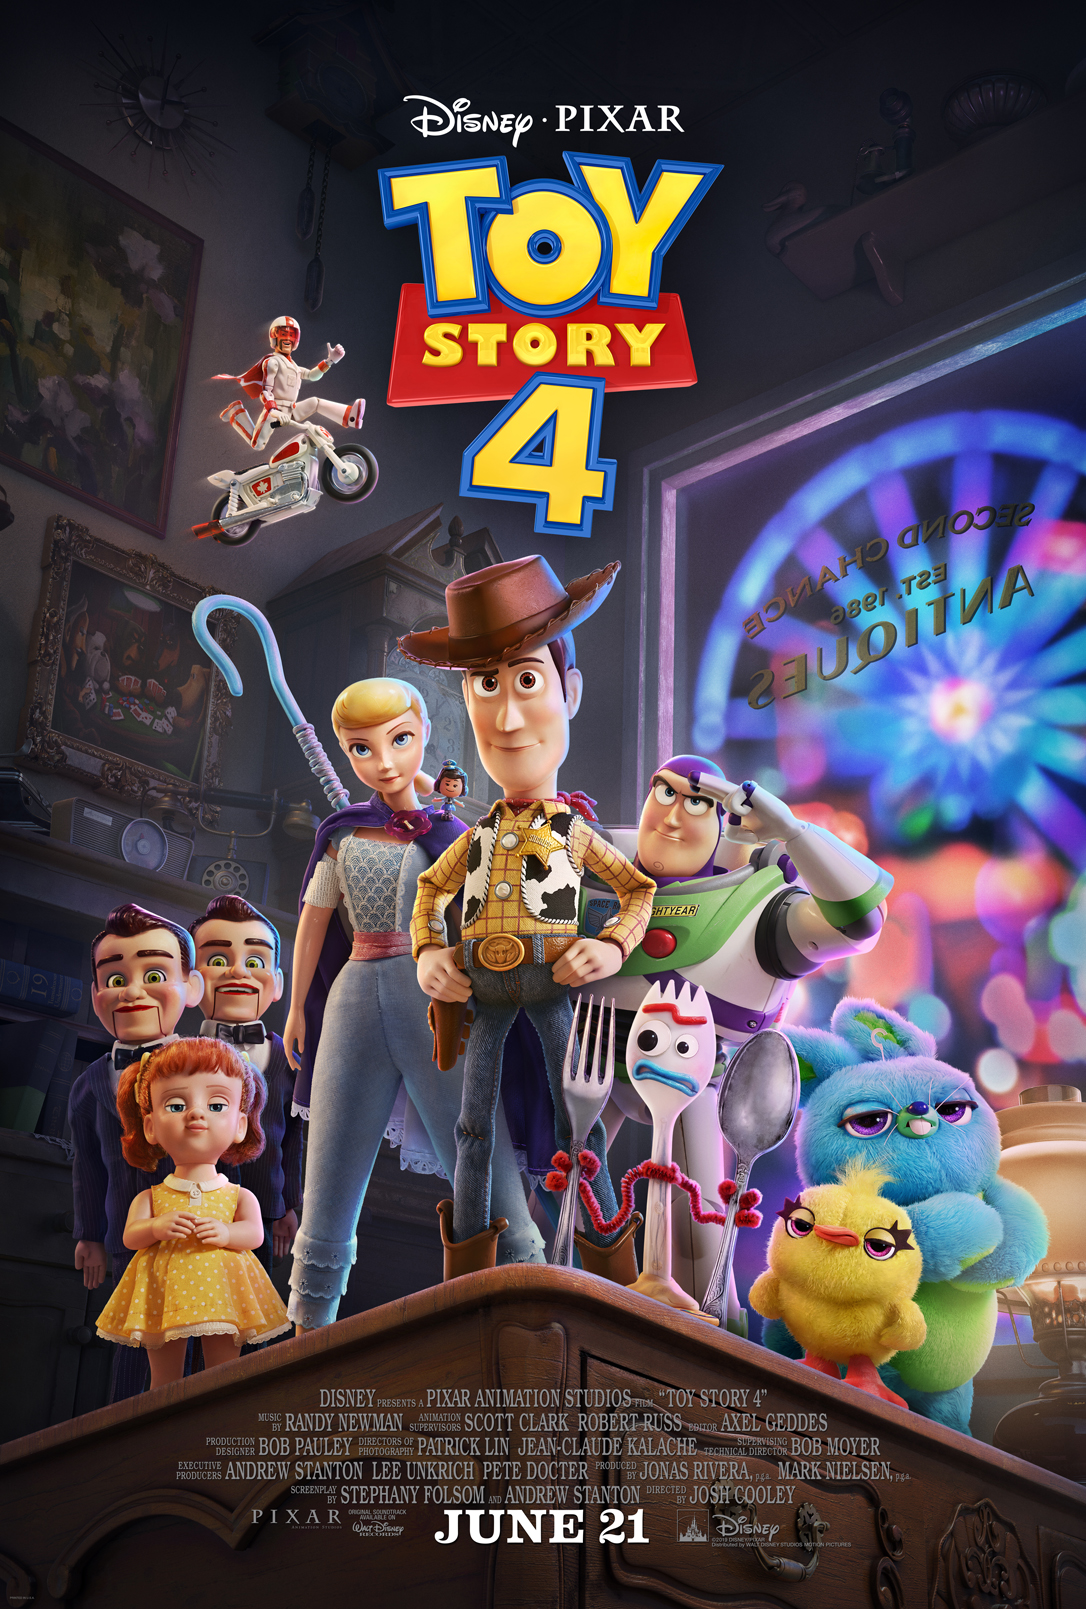 ToyStory45c90ee4349d75